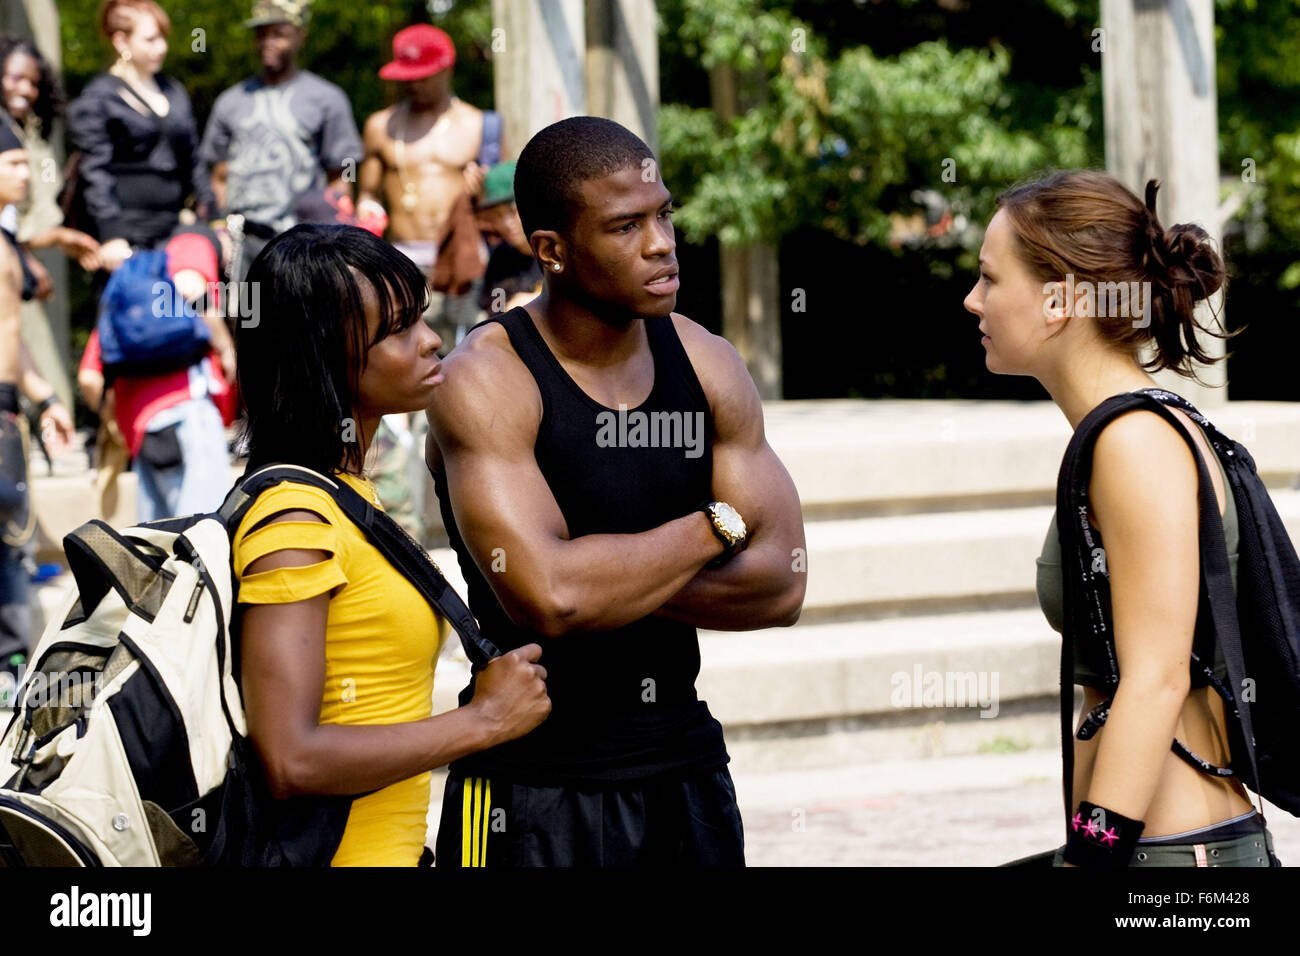 RELEASE DATE: February 14, 2008. MOVIE TITLE: Step Up 2. STUDIO: Touchstone Pictures. PLOT: Romantic sparks occur between two dance students from different backgrounds at the Maryland School of the Arts. PICTURED: TELISHA SHAW as Felicia, ALFRED NOLAN THOMAS, BRIANA EVIGAN as Andie. Stock Photo